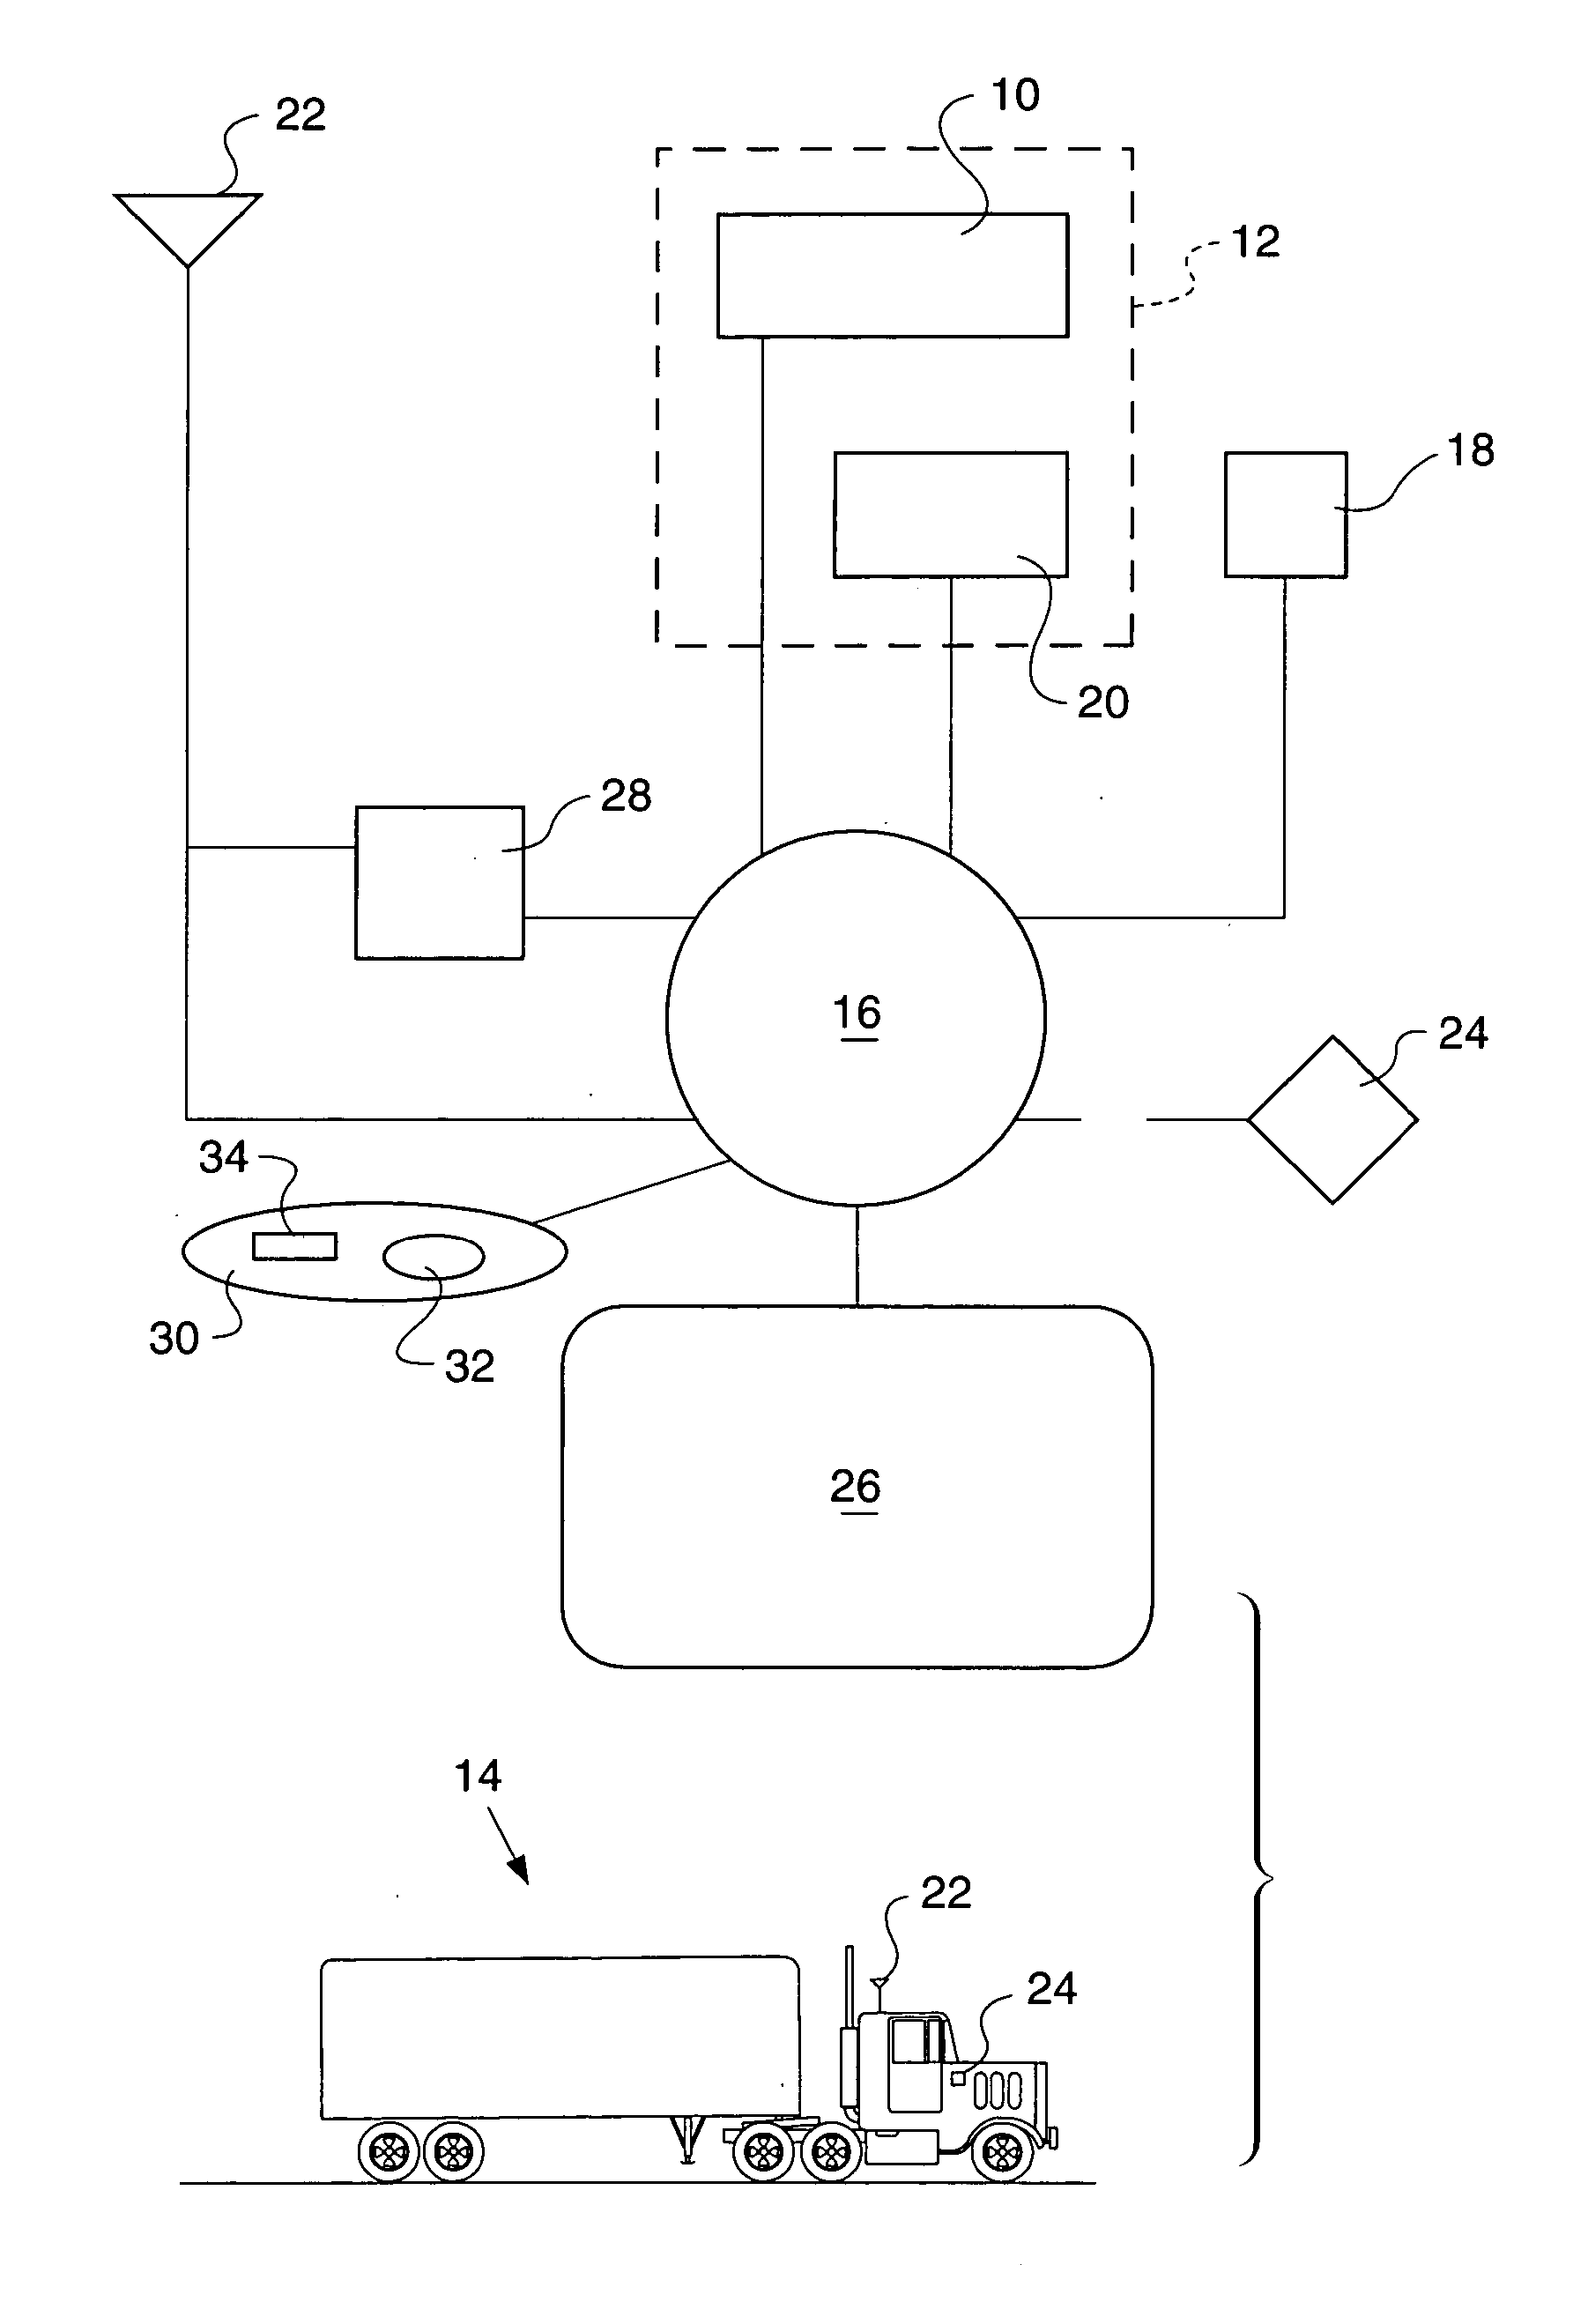 Action recommendation system for a mobile vehicle